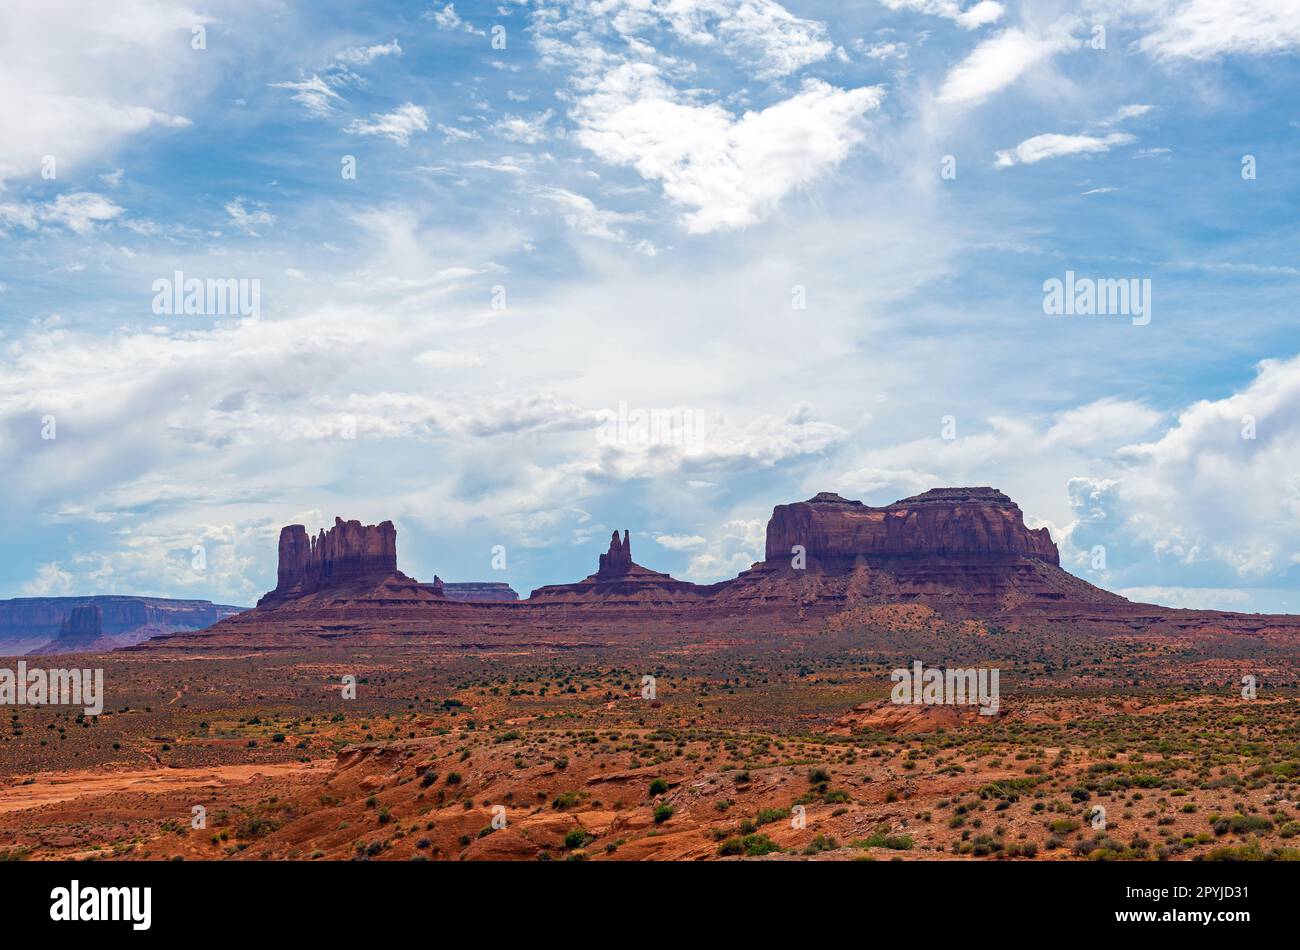 Buttes in Monument Valley Navajo Tribal Park, Arizona and Utah, USA. Stock Photo